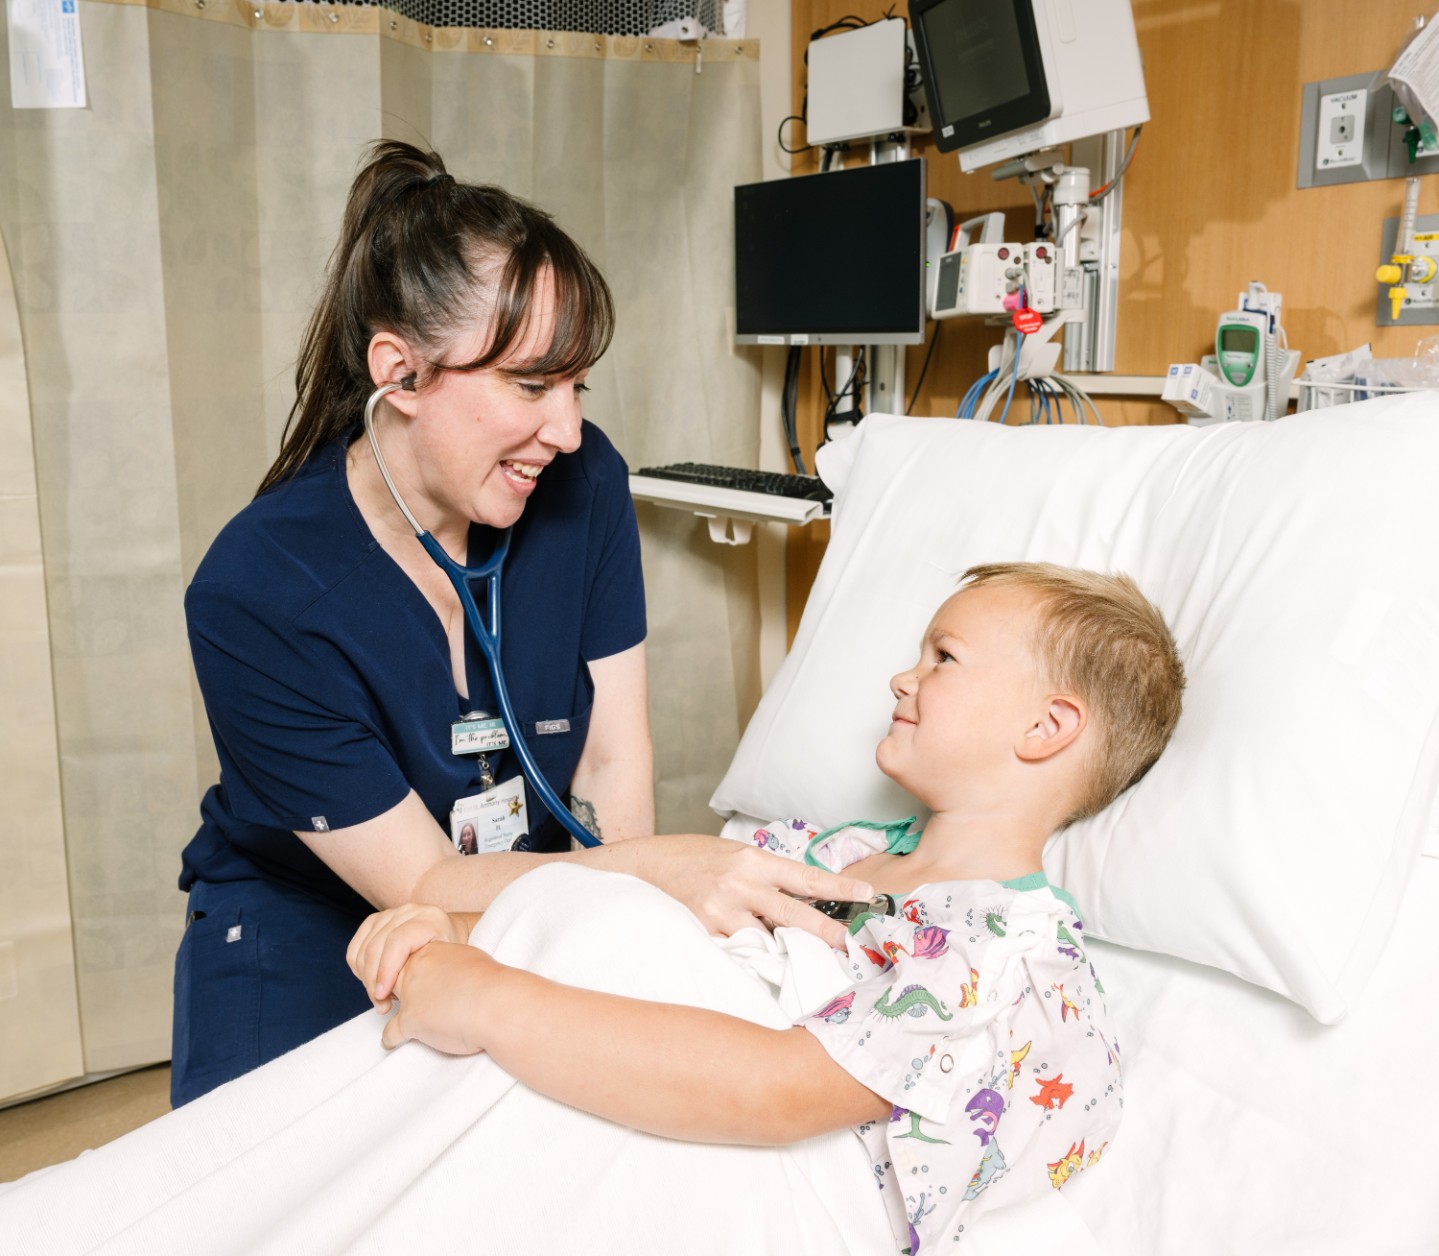 photo of nurse in blue scrubs with stethoscope listening to small child